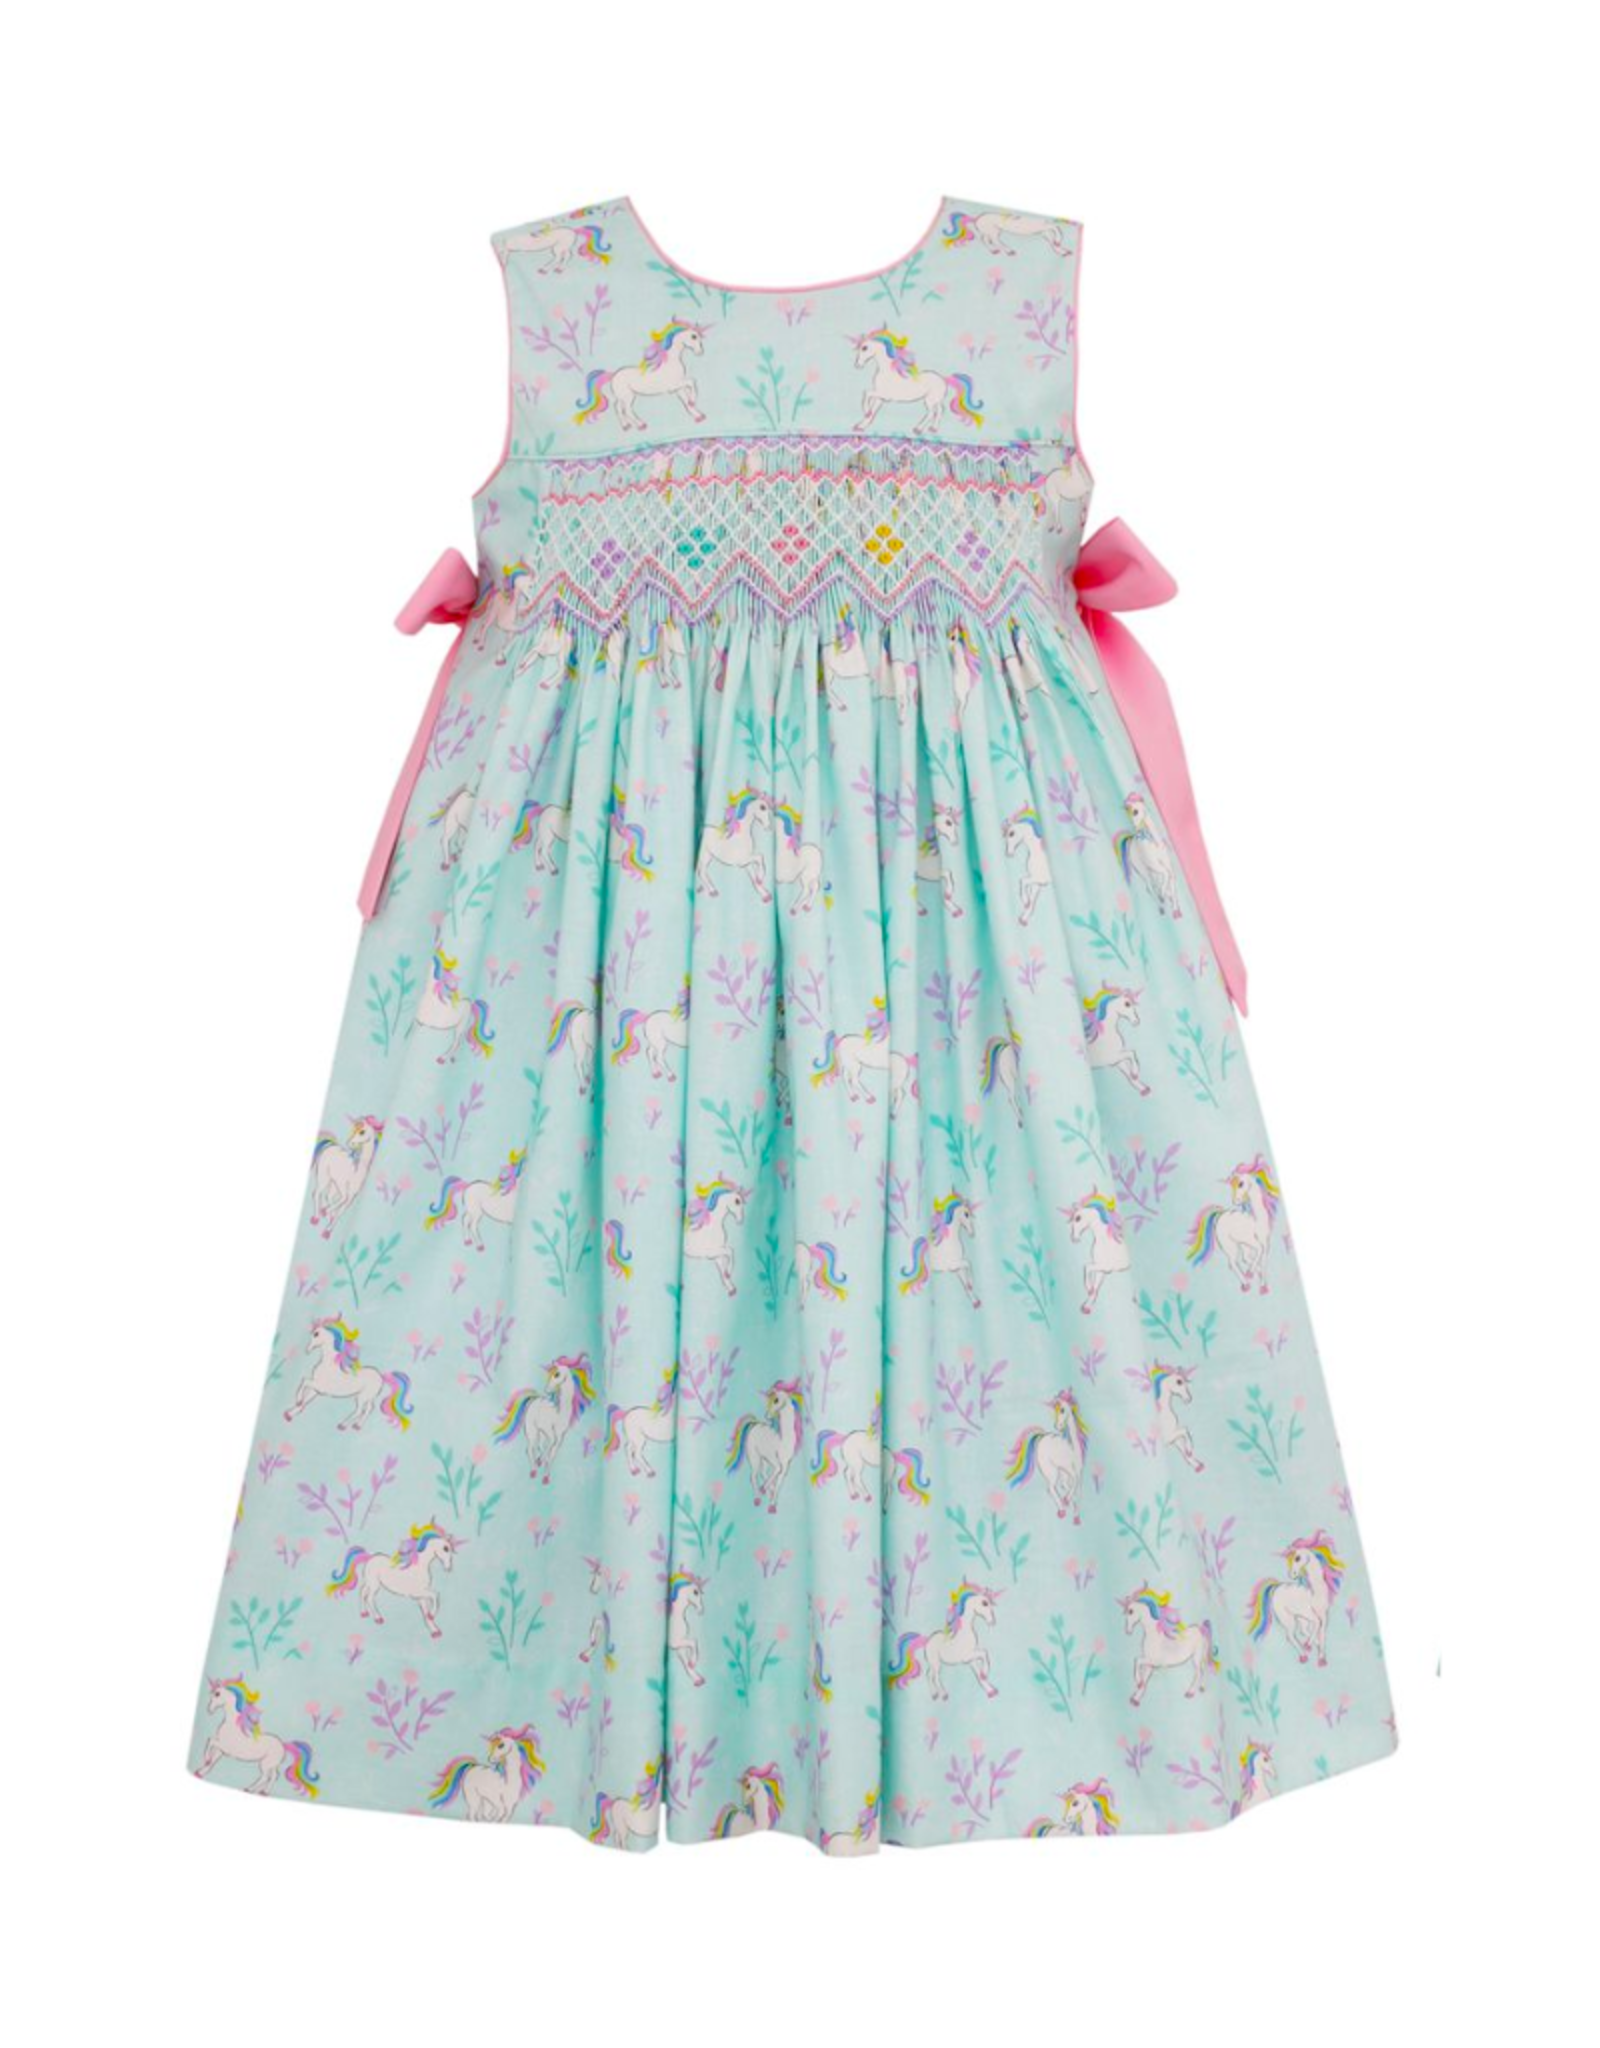 Claire and Charlie Aqua Unicorn Print Sundress with Pink Side Bows, 12m